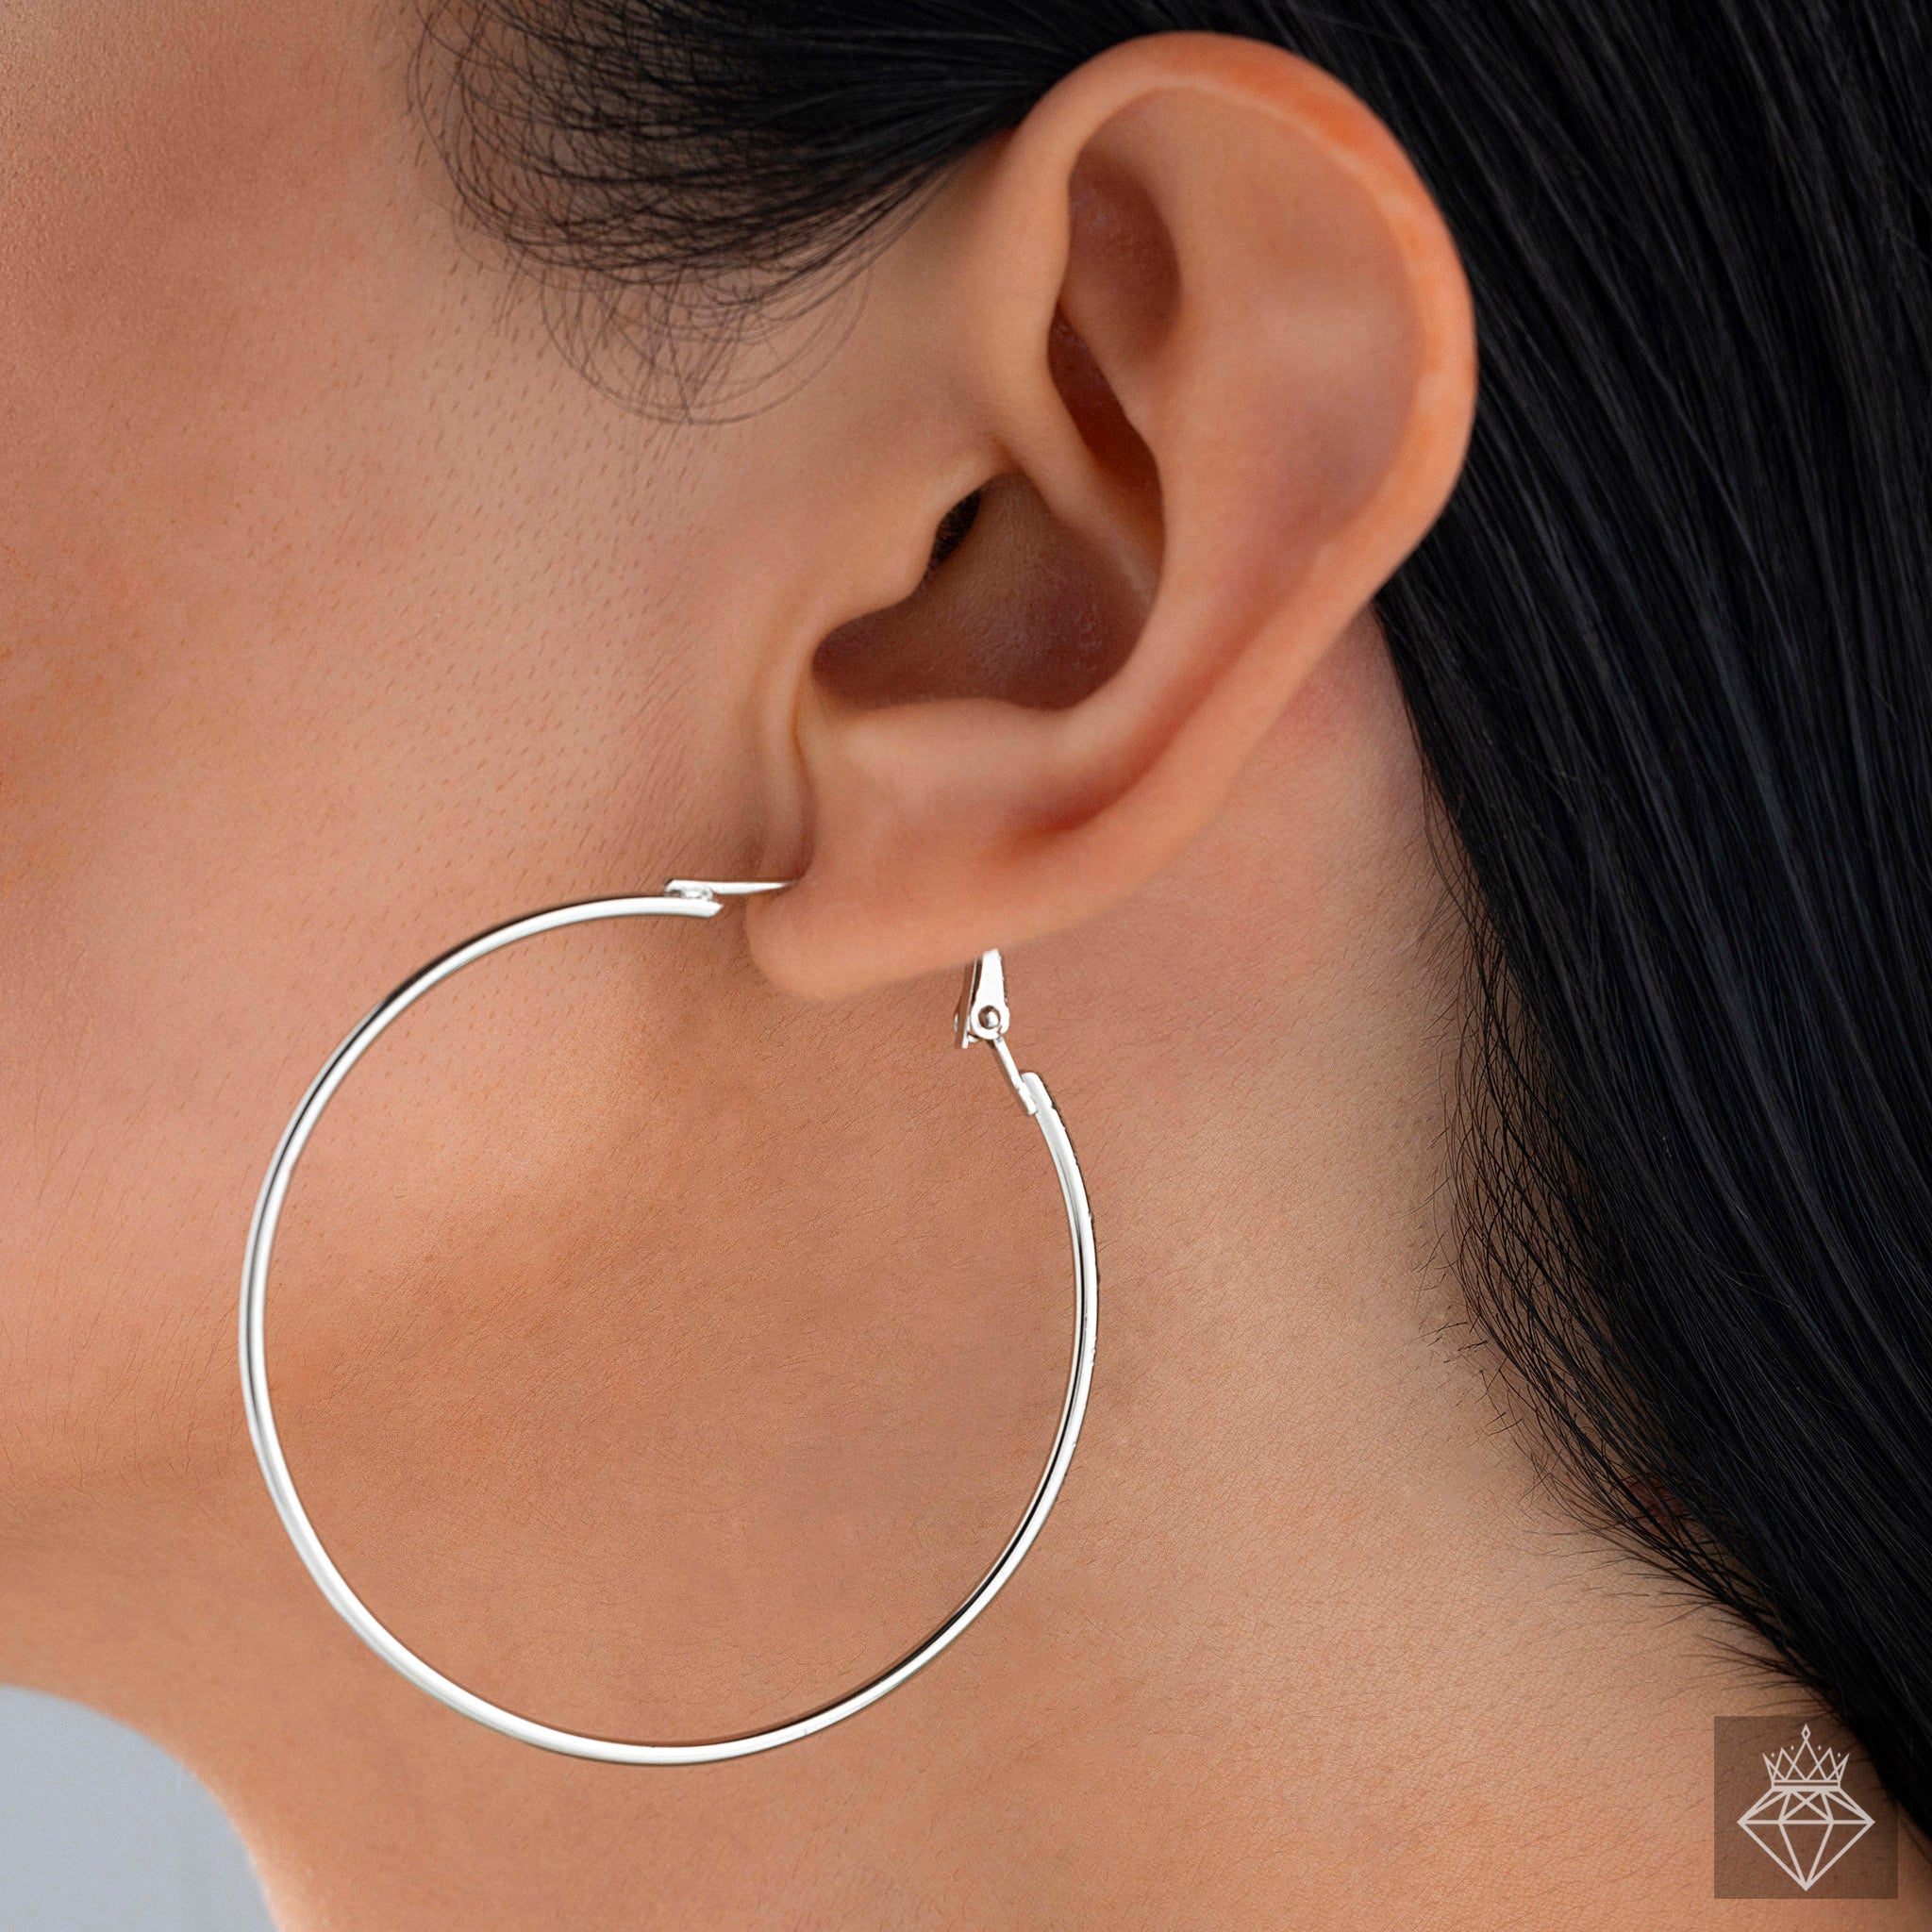 Magnificent Big Hoops By PRAO